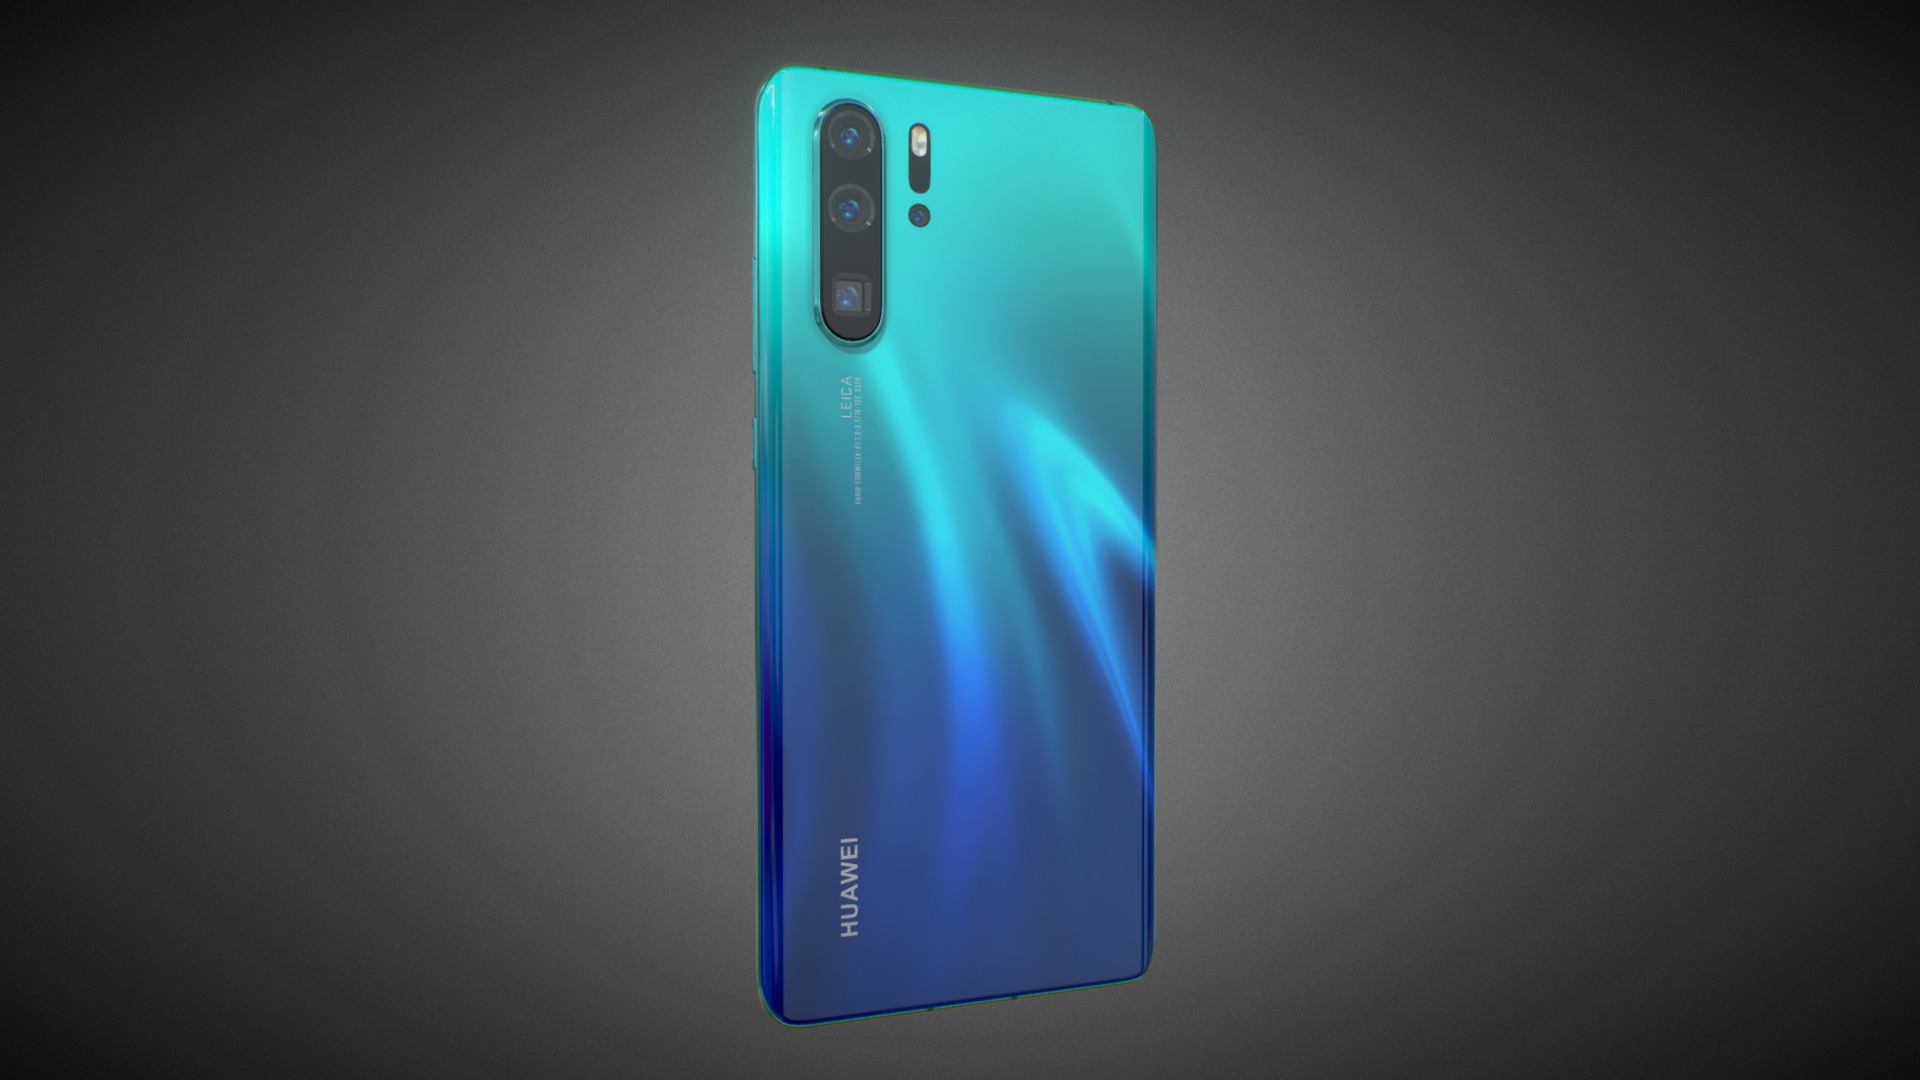 Huawei P30 Pro Aurora

This set:
3D element v2.2
The model given is easy to use
- 1 file obj standard
- 1 file 3ds Max 2013 vray material 
- 1 file 3ds Max 2013 corona material
- 1 file of 3Ds
- 1 file e3d full set of materials.
- 1 file cinema 4d standard.

Topology of geometry:




forms and proportions of The 3D model

the geometry of the model was created very neatly

there are no many-sided polygons

detailed enough for close-up renders

the model optimized for turbosmooth modifier

Not collapsed the turbosmooth modified

apply the Smooth modifier with a parameter to get the desired level of detail

Materials and Textures:




3ds max files included Vray-Shaders

3ds max files included Corona-Shaders

file e3d full set of materials

all texture paths are cleared

Organization of scene:




to all objects and materials

real world size (system units - mm)

coordinates of location of the model in space (x0, y0, z0)

does not contain extraneous or hidden objects (lights, cameras, shapes etc.)
 - Huawei P30 Pro Aurora - Buy Royalty Free 3D model by madMIX 3d model